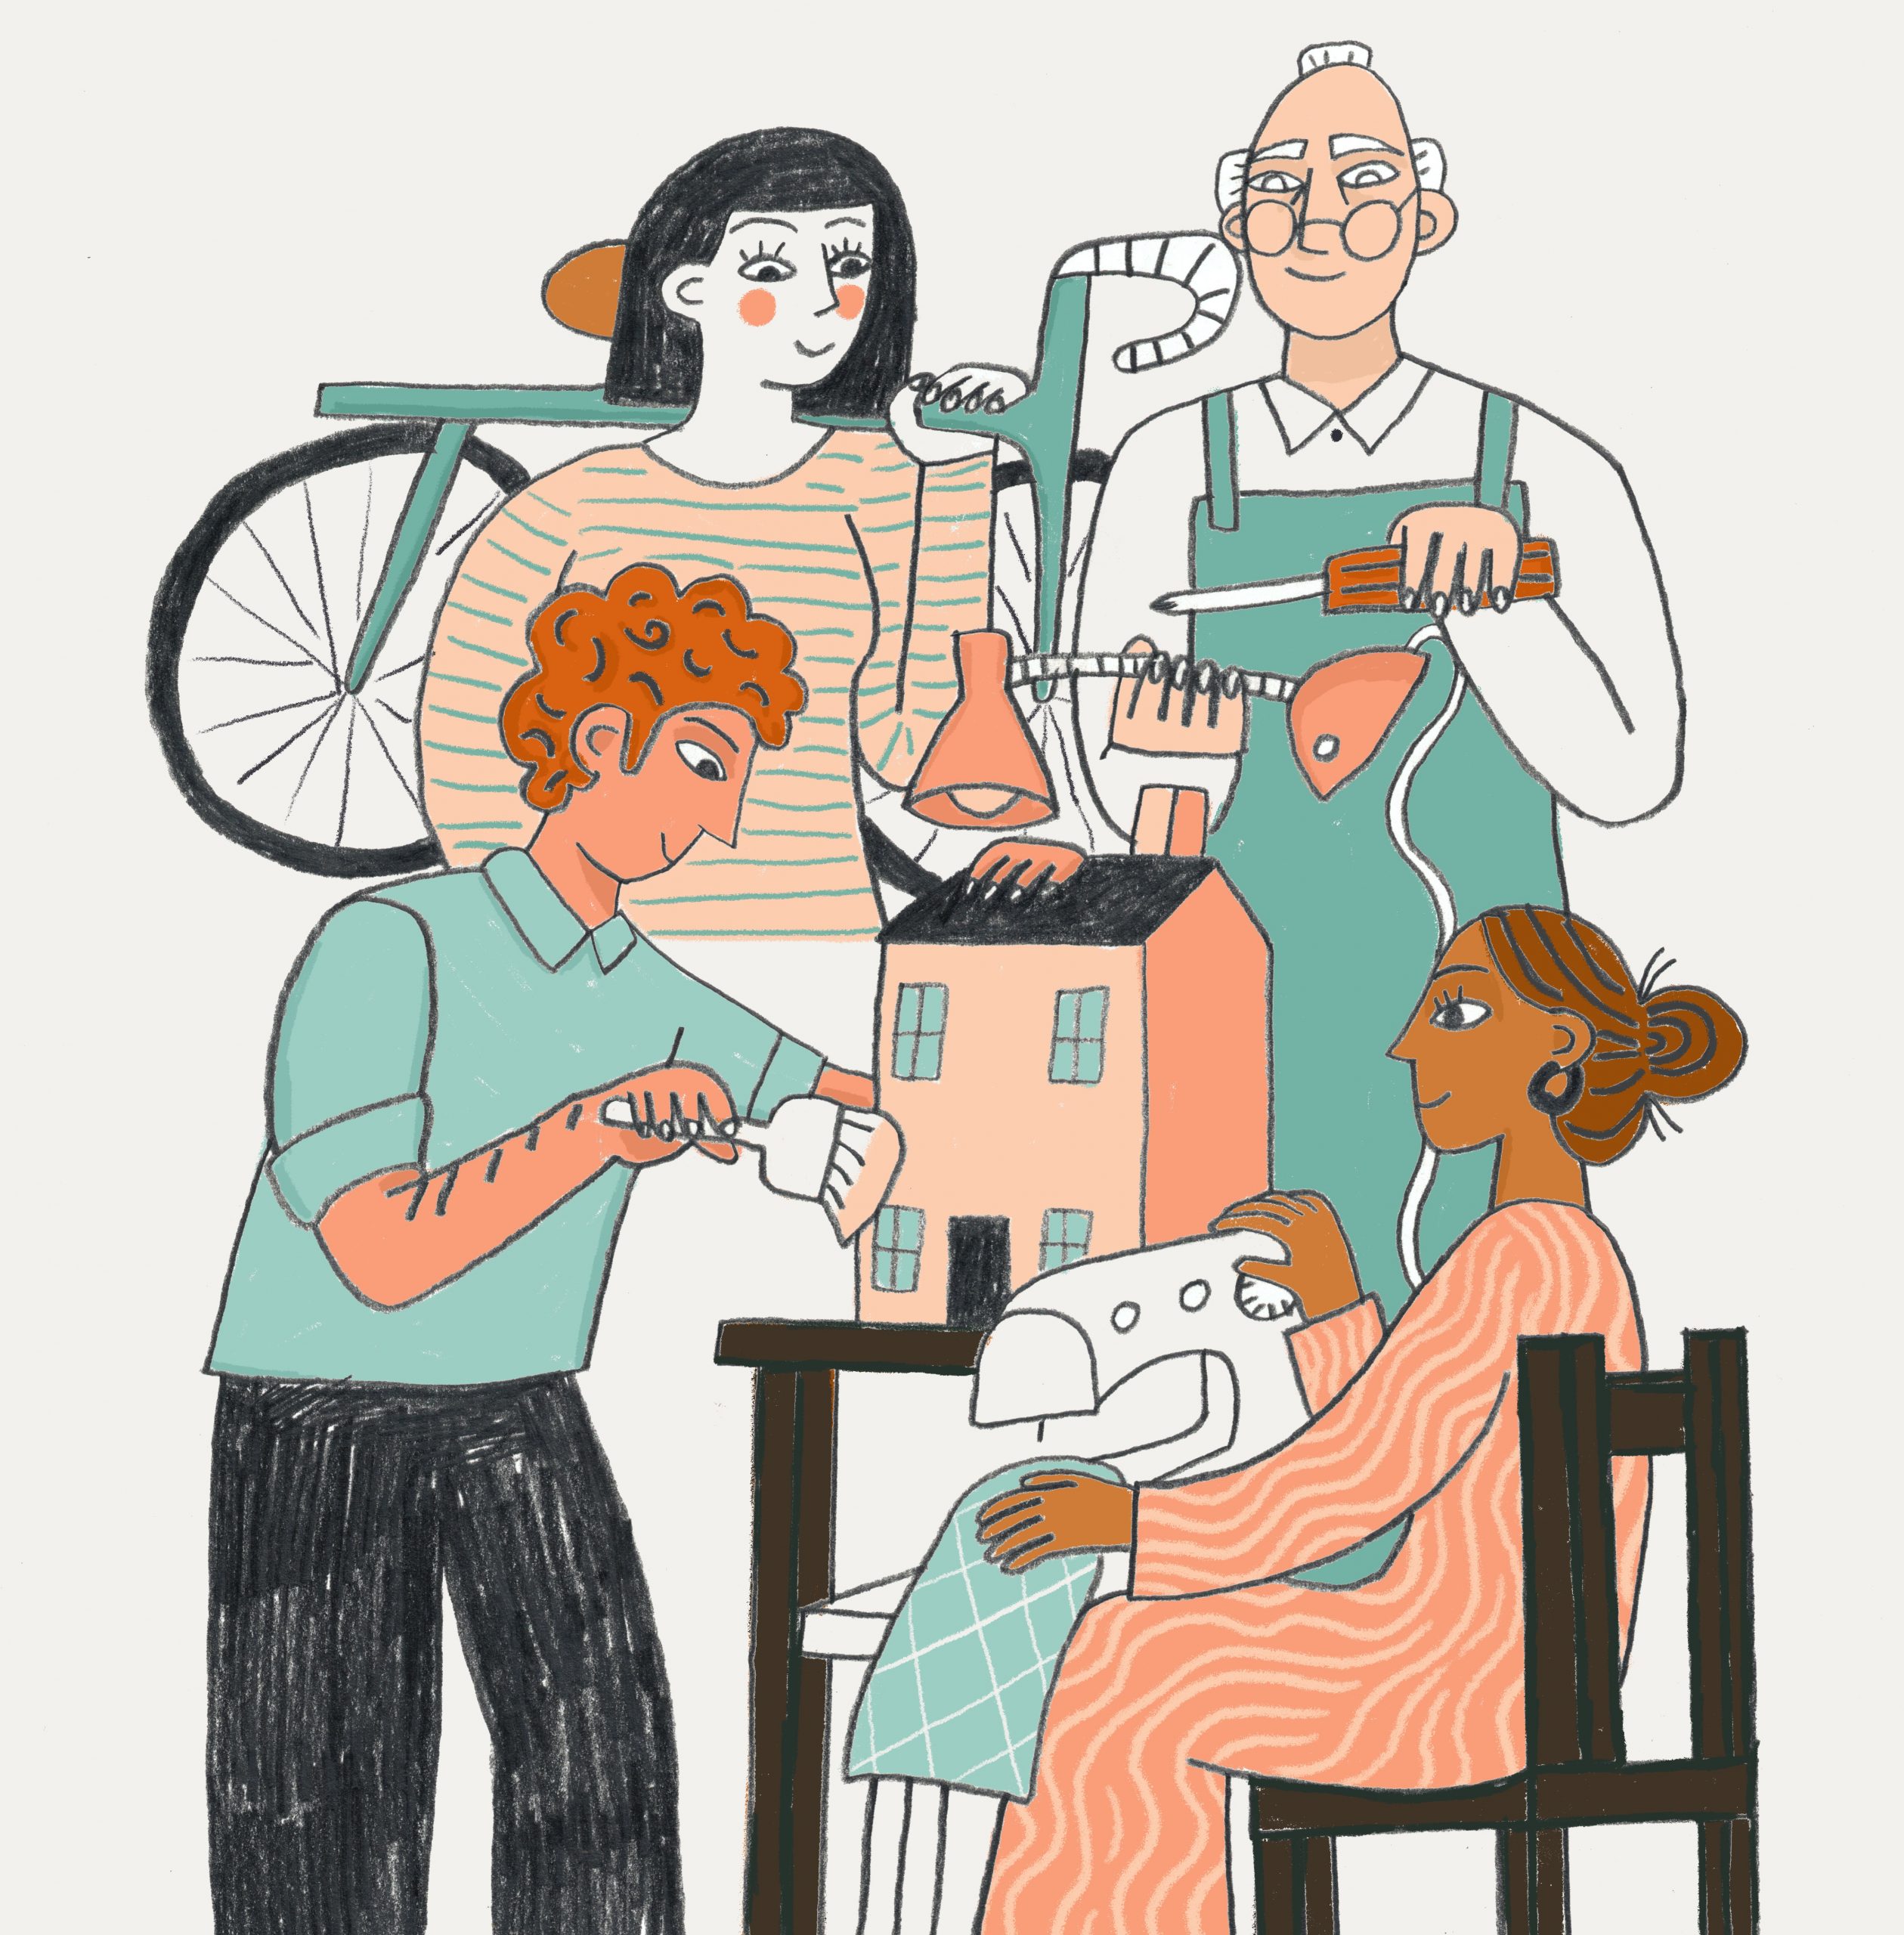 Drawing of four people repairing different objects: a bicycle, a doll's house, a lamp and an article of clothing